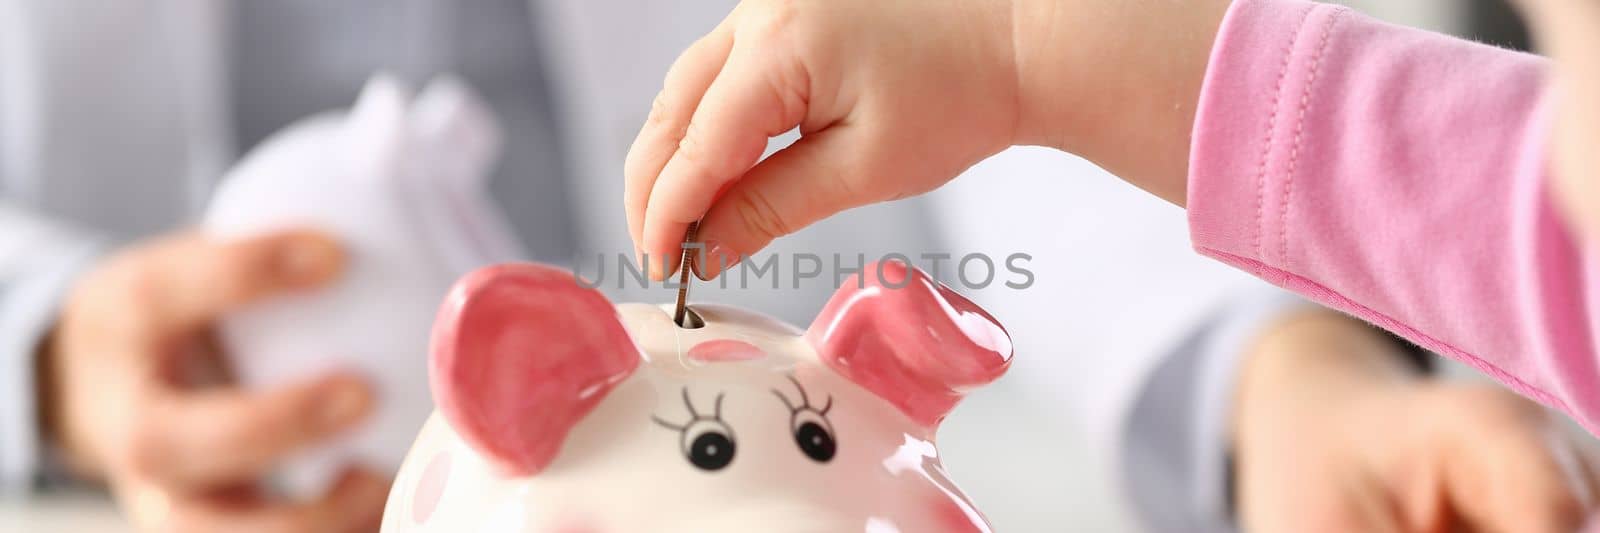 Child hand put a money coin in piggy bank to save money wealth by kuprevich